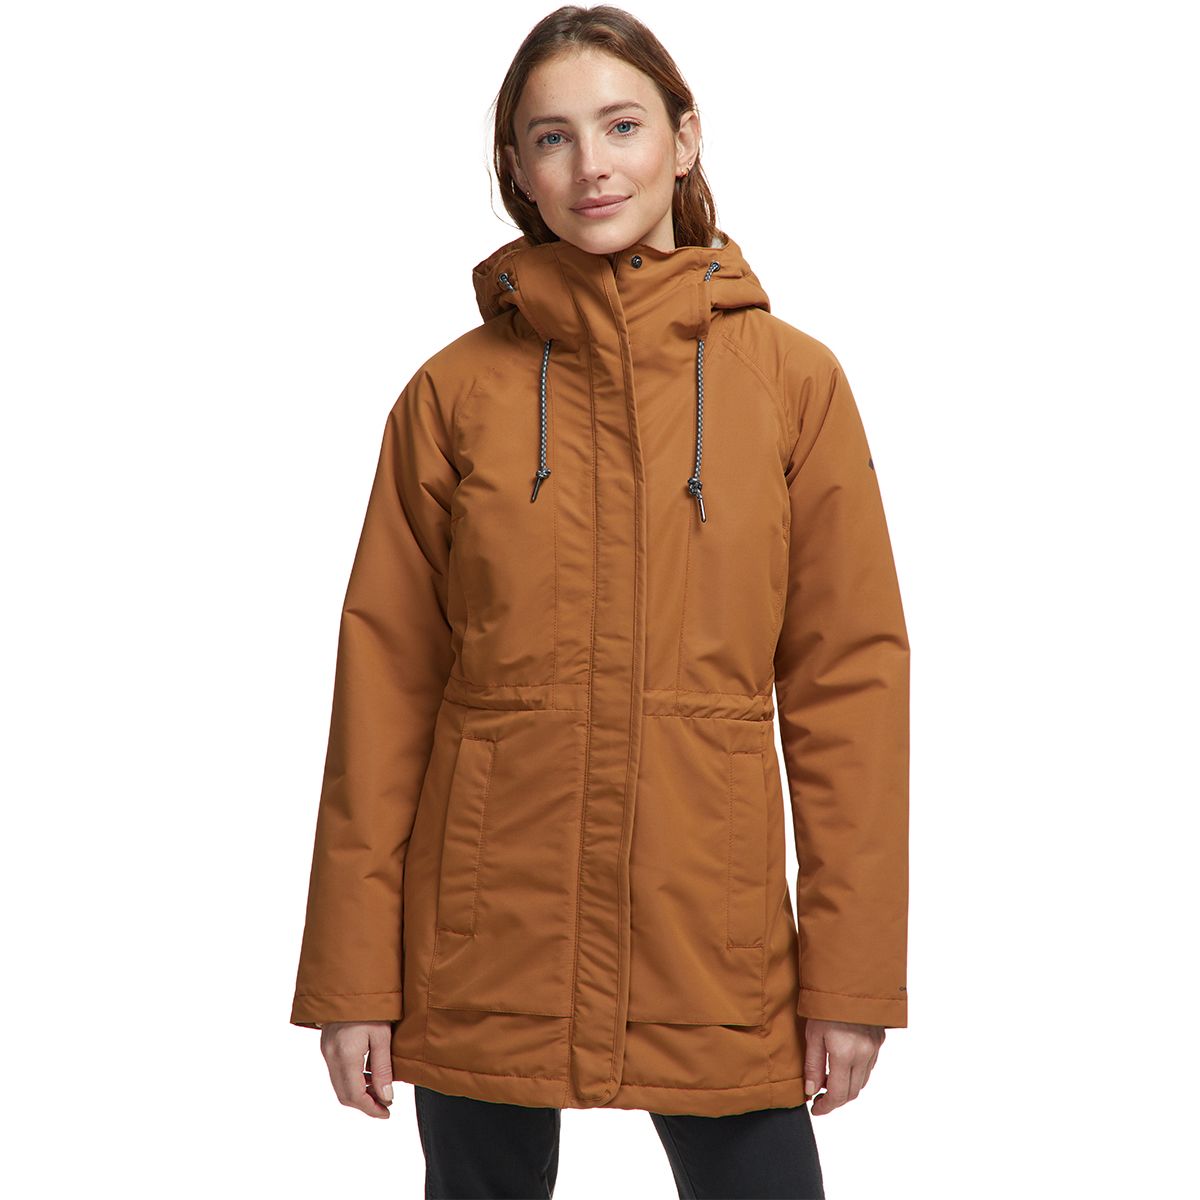 south canyon lined jacket columbia